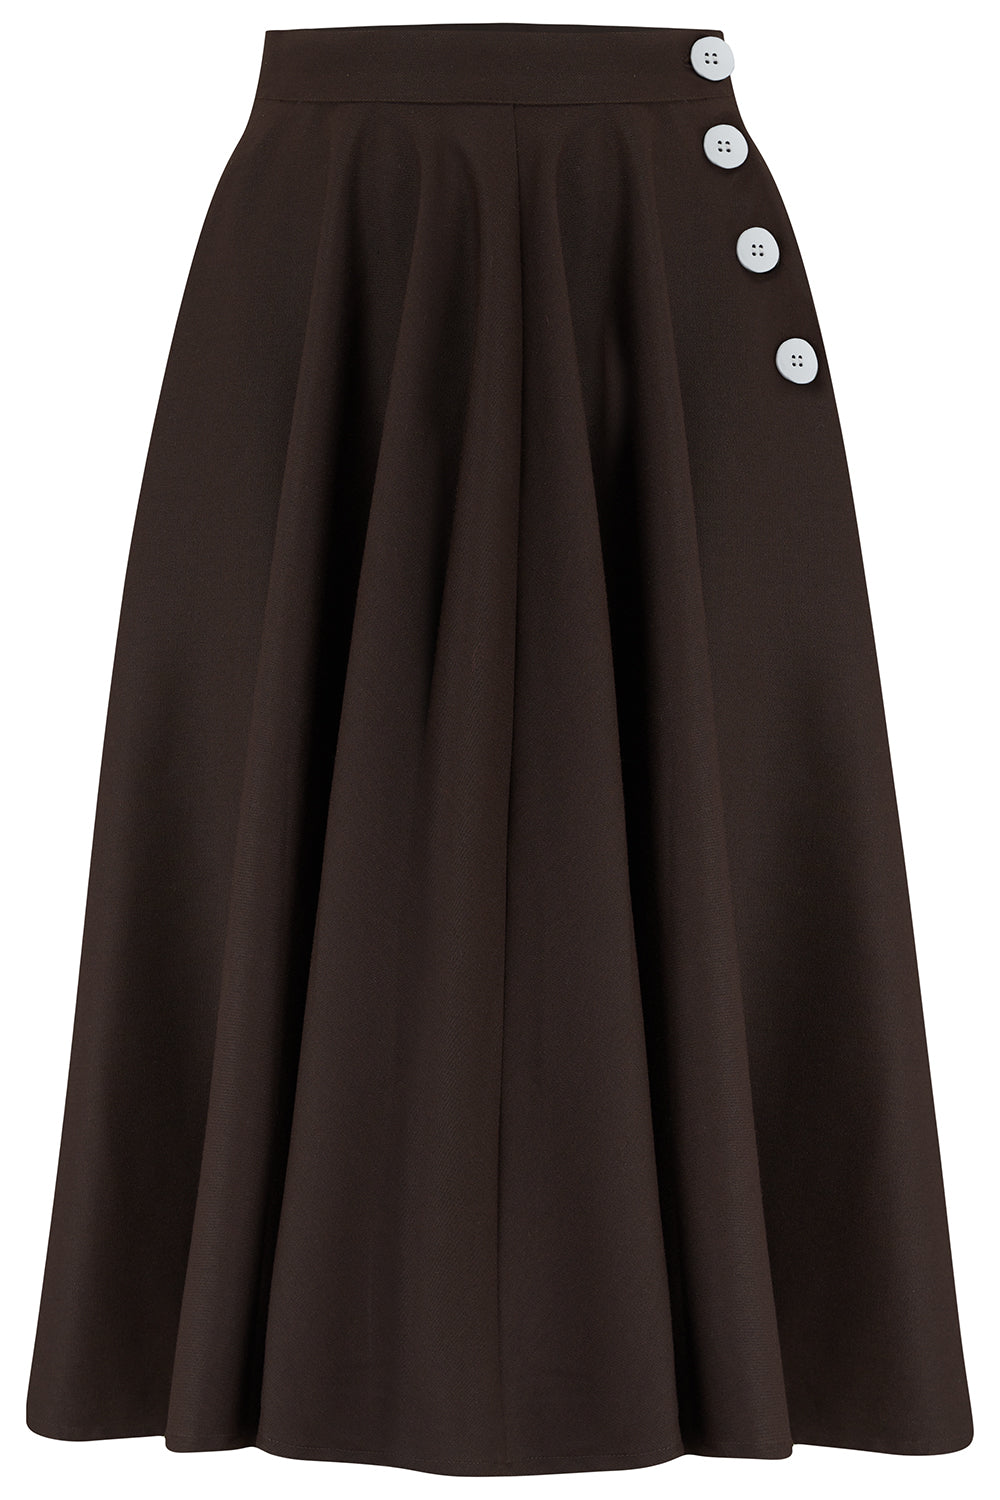 "Sylvia" Tailored Skirt in Solid Brown , Classic & Authentic 1940s Vintage Inspired Style - True and authentic vintage style clothing, inspired by the Classic styles of CC41 , WW2 and the fun 1950s RocknRoll era, for everyday wear plus events like Goodwood Revival, Twinwood Festival and Viva Las Vegas Rockabilly Weekend Rock n Romance The Seamstress Of Bloomsbury